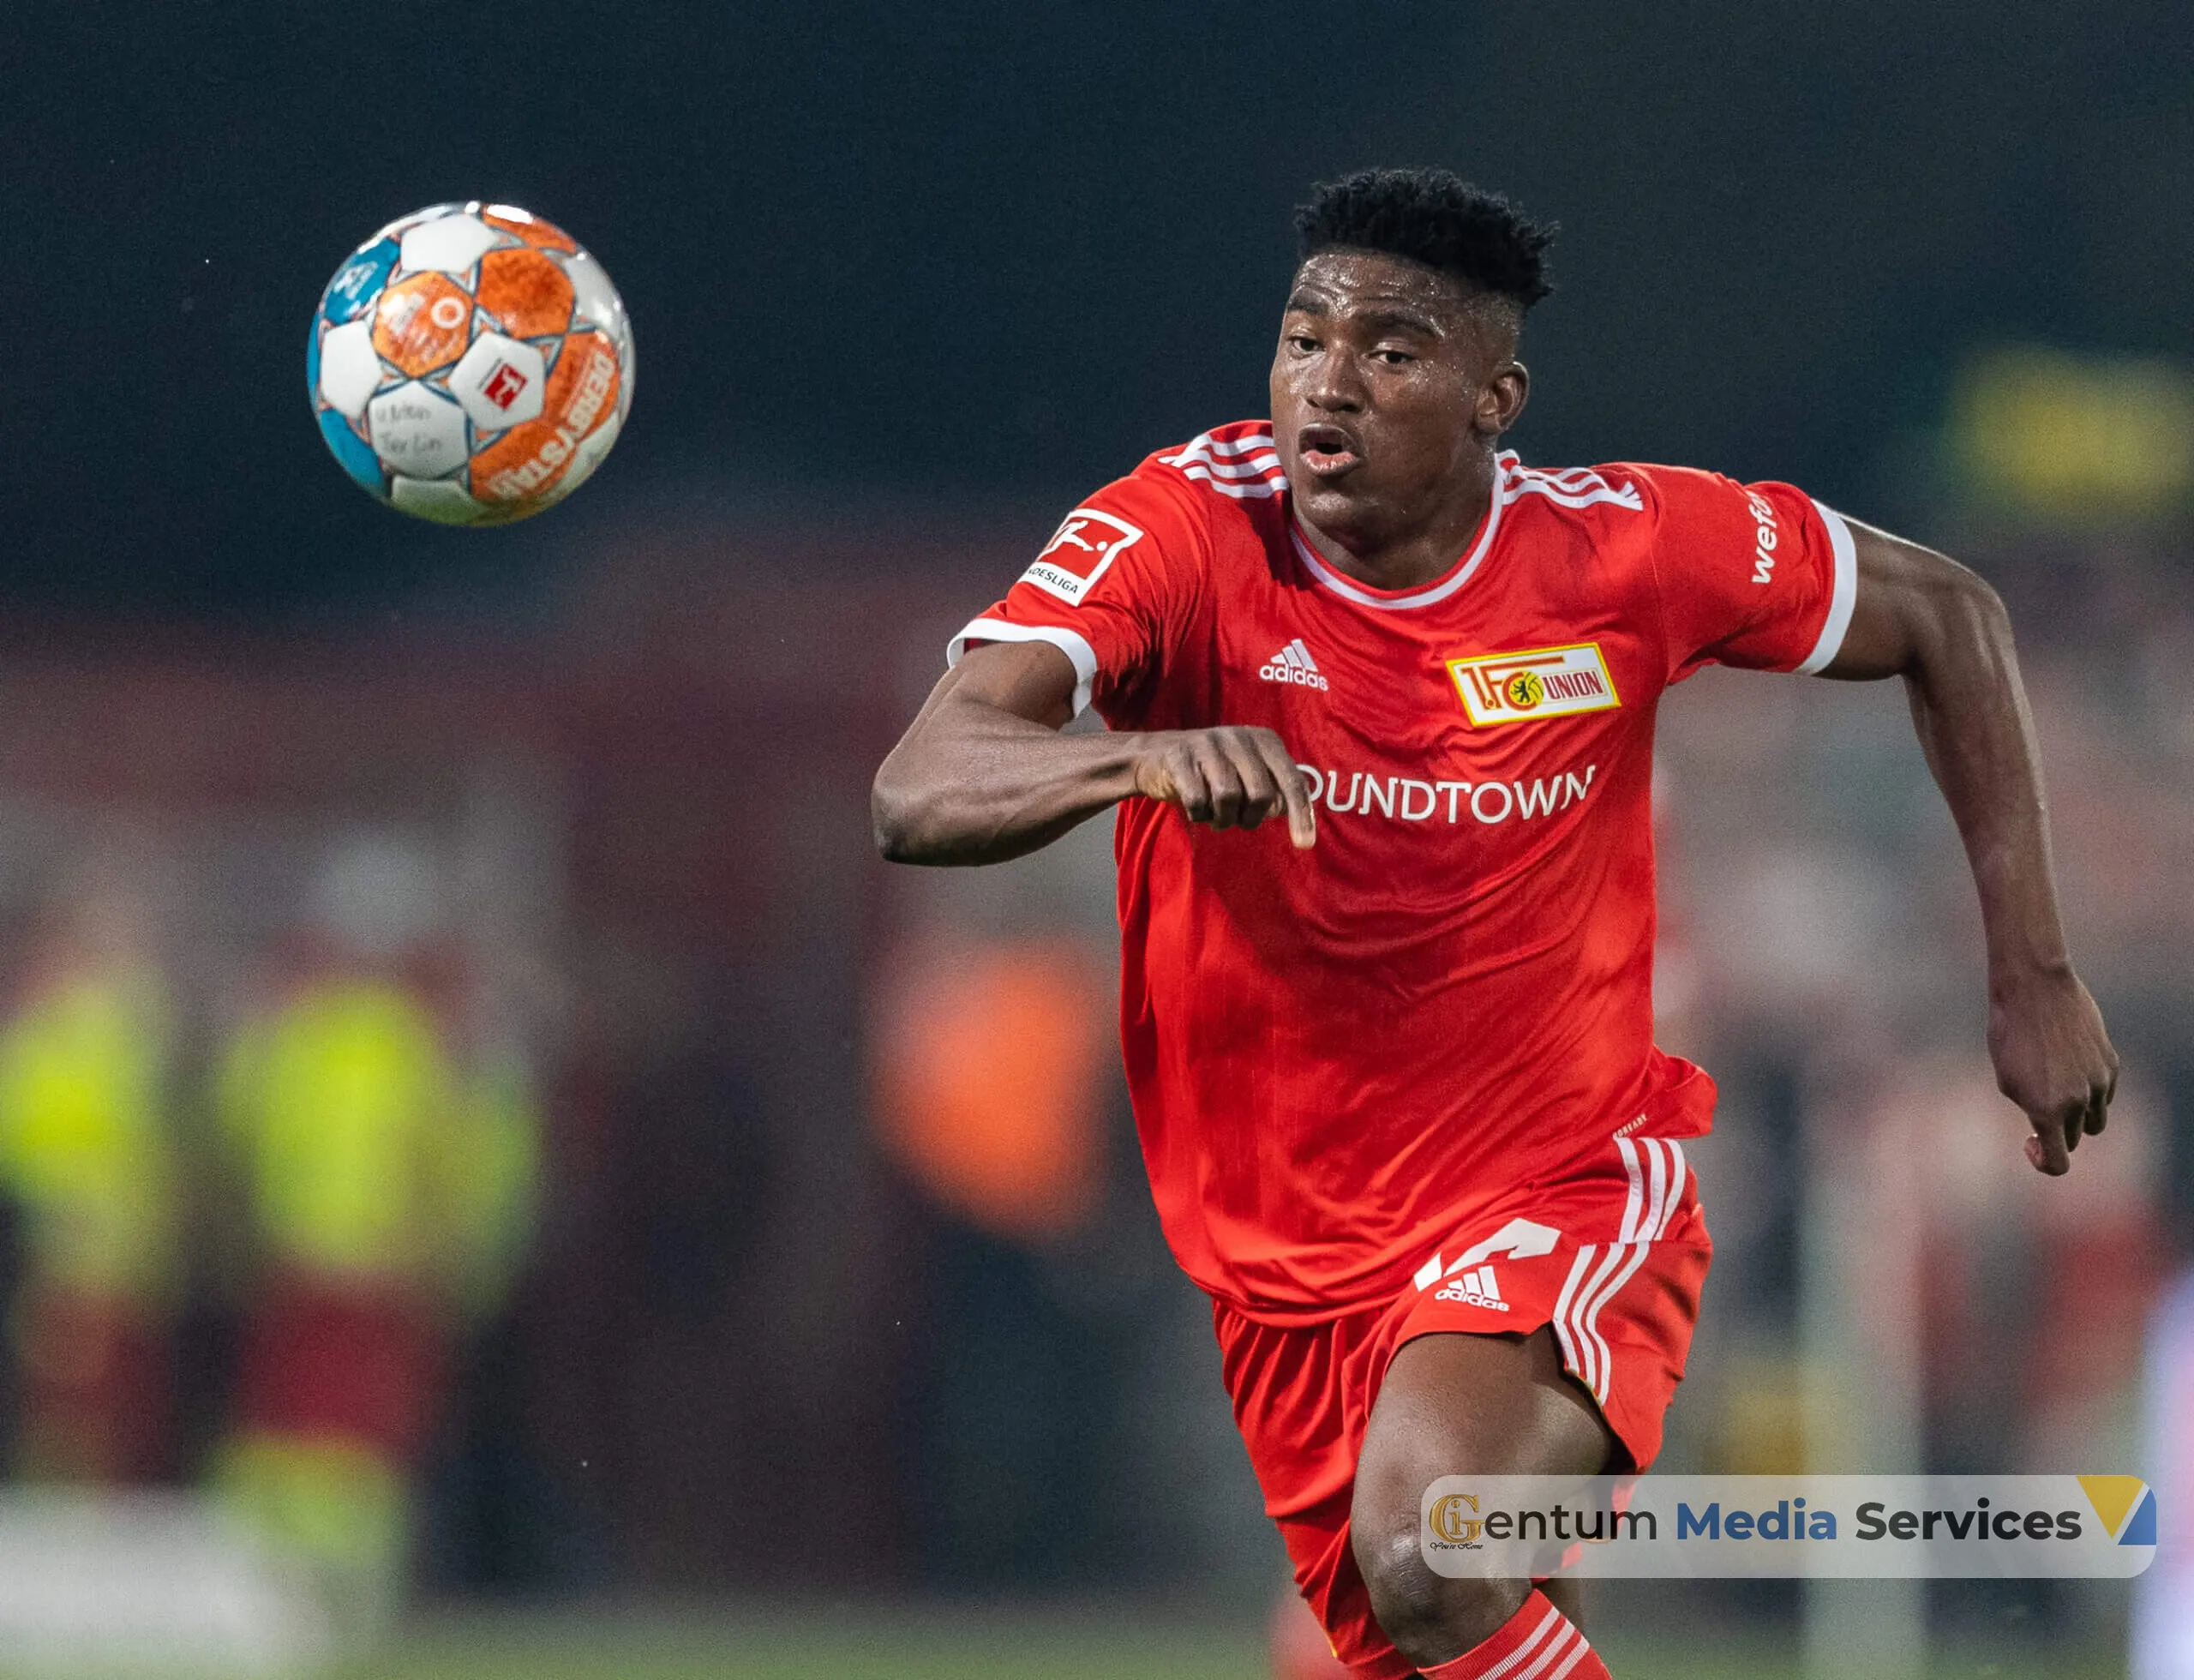 Awoniyi to be Sidelined for Two Months with Groin Injury, Gentum Media Services